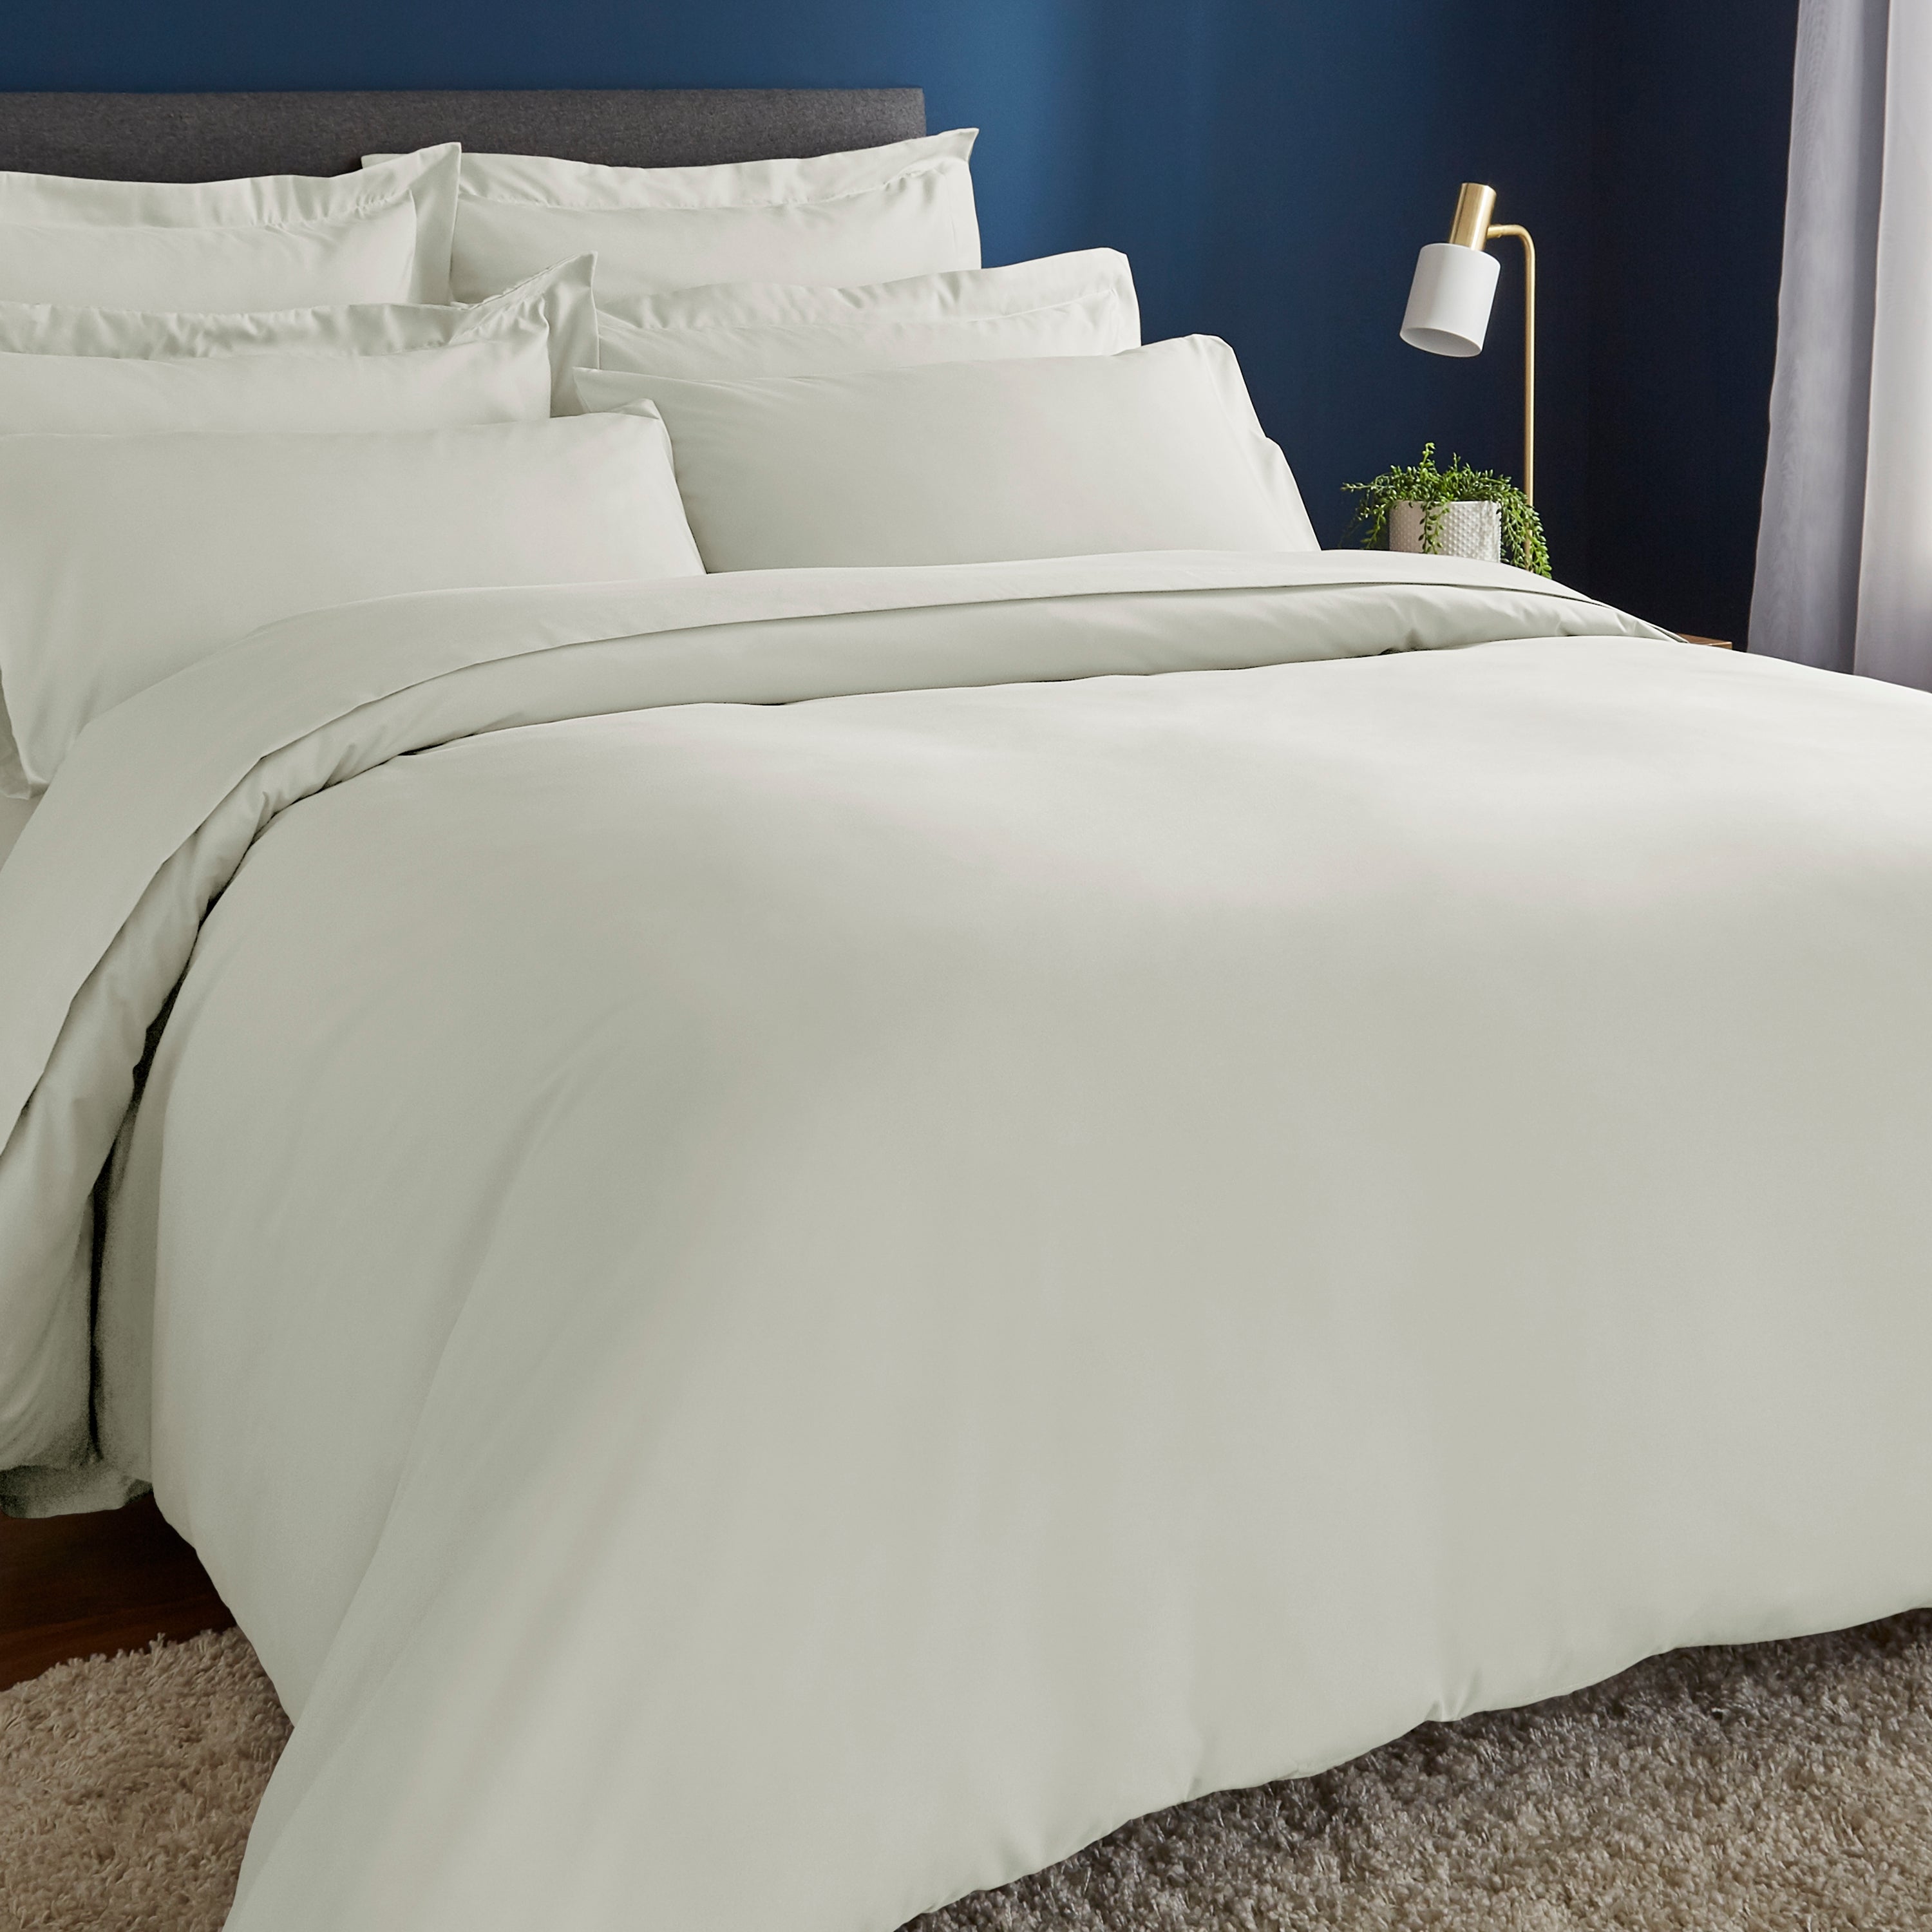 Image of Fogarty Soft Touch Natural Duvet Cover and Pillowcase Set white